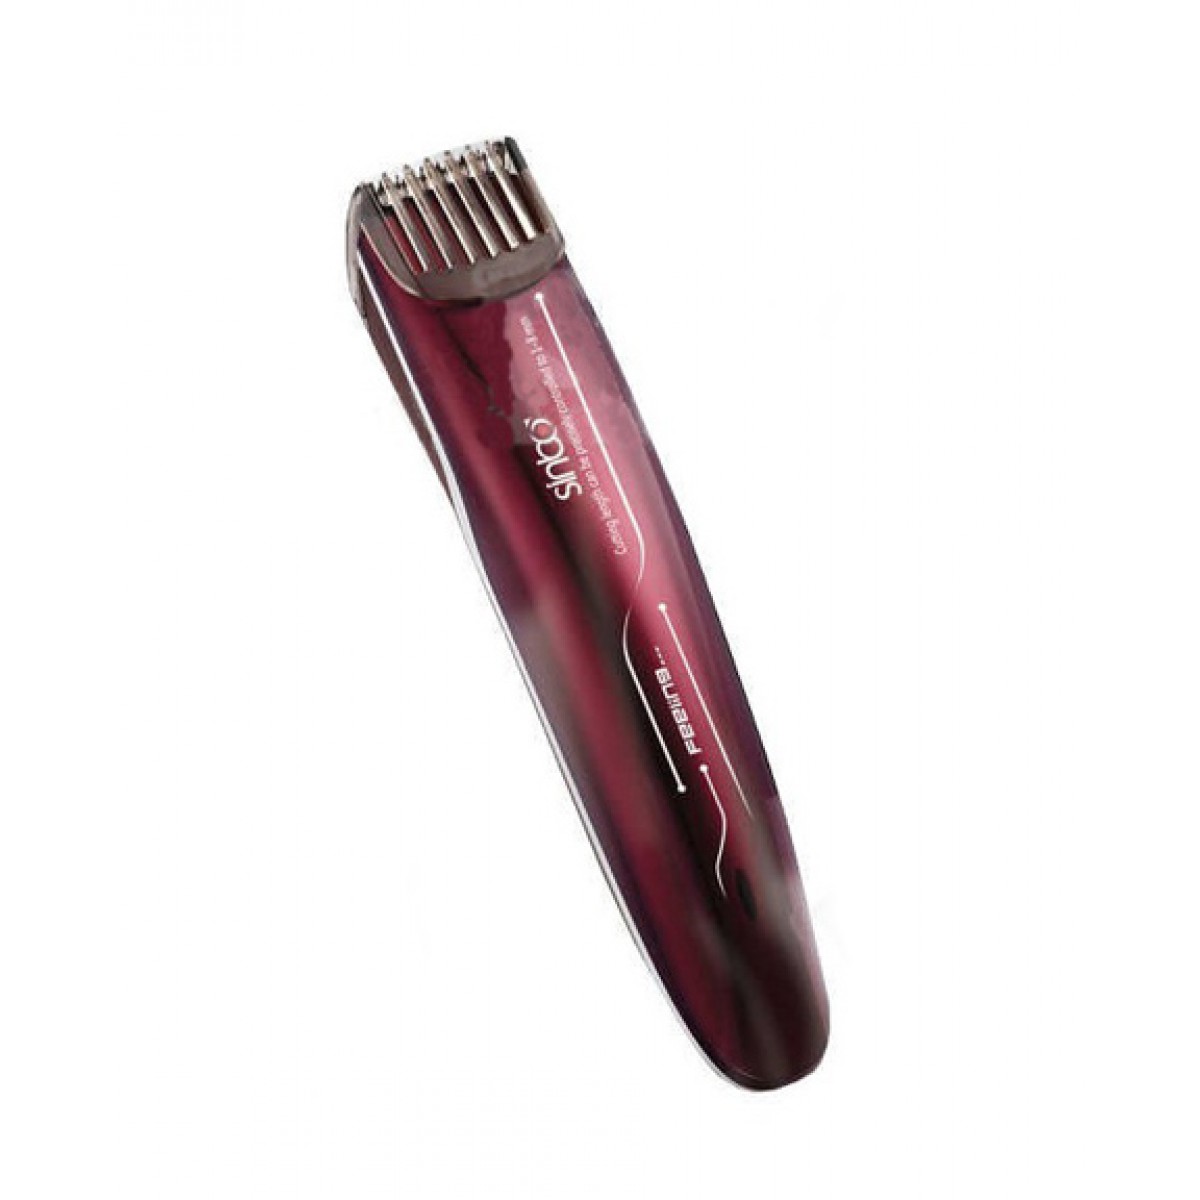 Sinbo SHC-4359 Rechargeable Hair Clipper